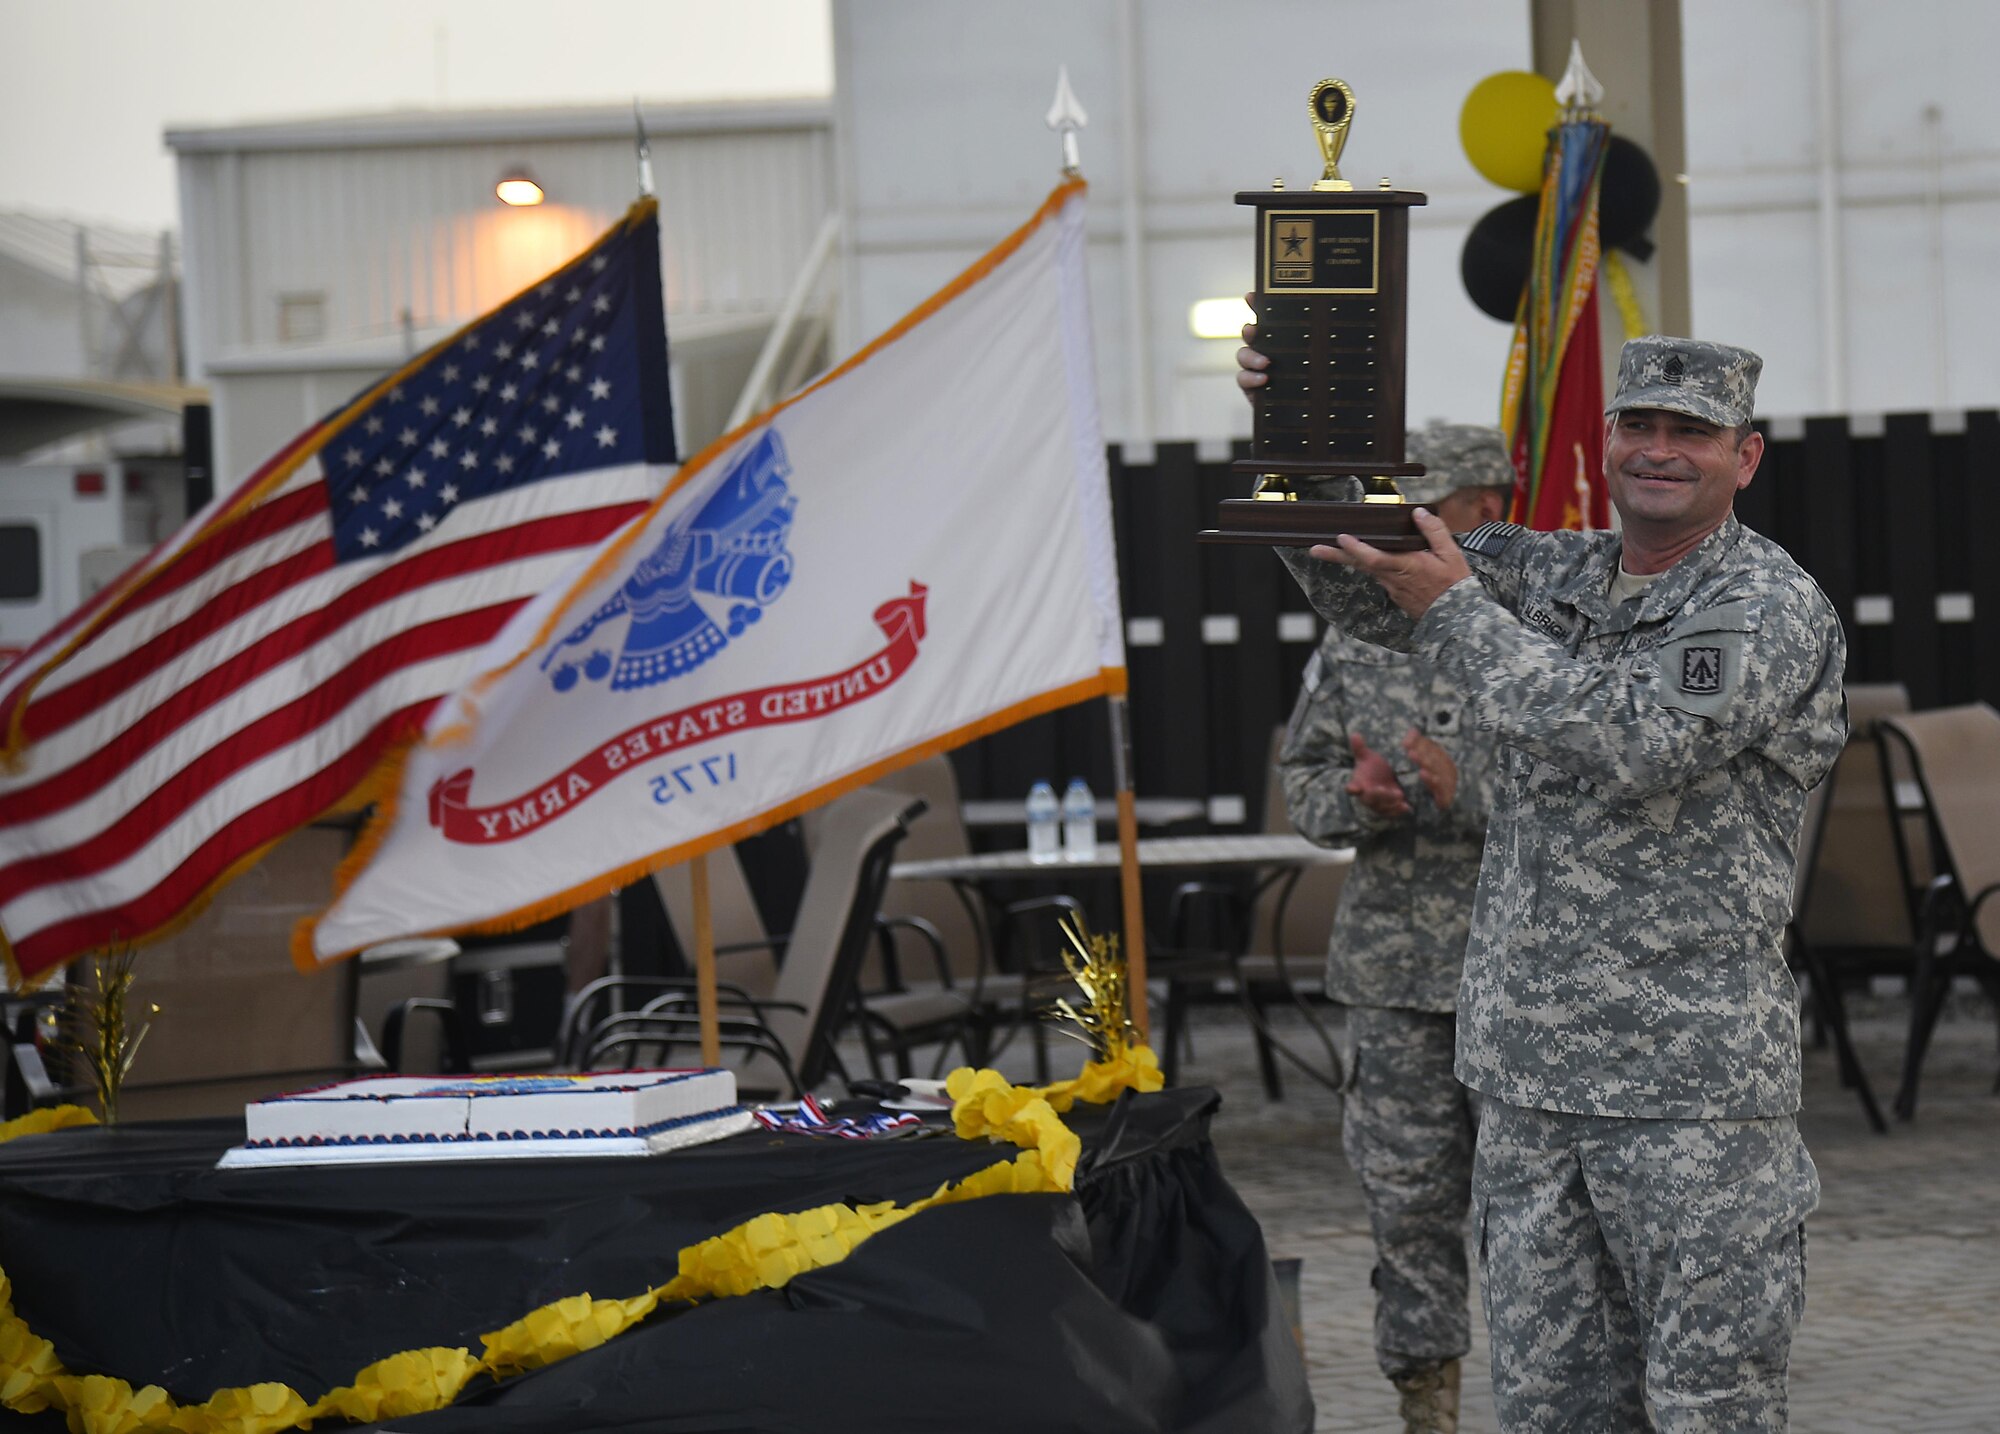 Command Sgt. Maj. Paul Albright, 1st Battalion, 7th Air Defense Artillery Regiment command sergeant major, holds up the Army birthday cup at an undisclosed location in Southwest Asia June 13, 2015. The Army was awarded the cup for being the top overall team during the two-day, five-sport U.S. Army birthday competition. (U.S. Air Force photo/Tech. Sgt. Jeff Andrejcik)